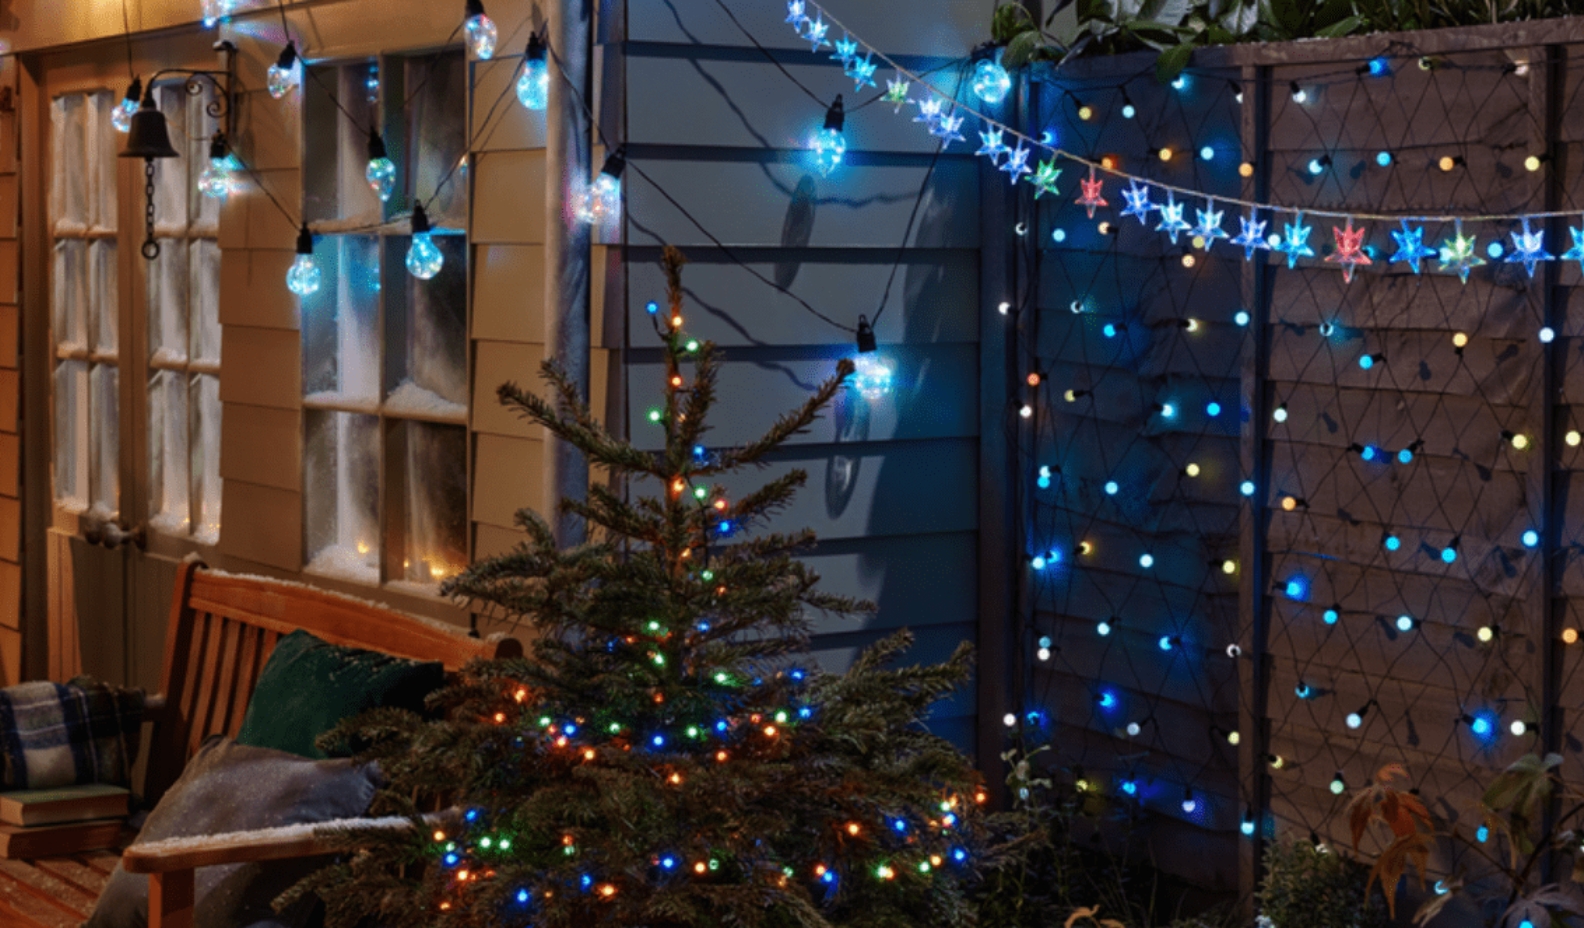 Christmas lights buying guide